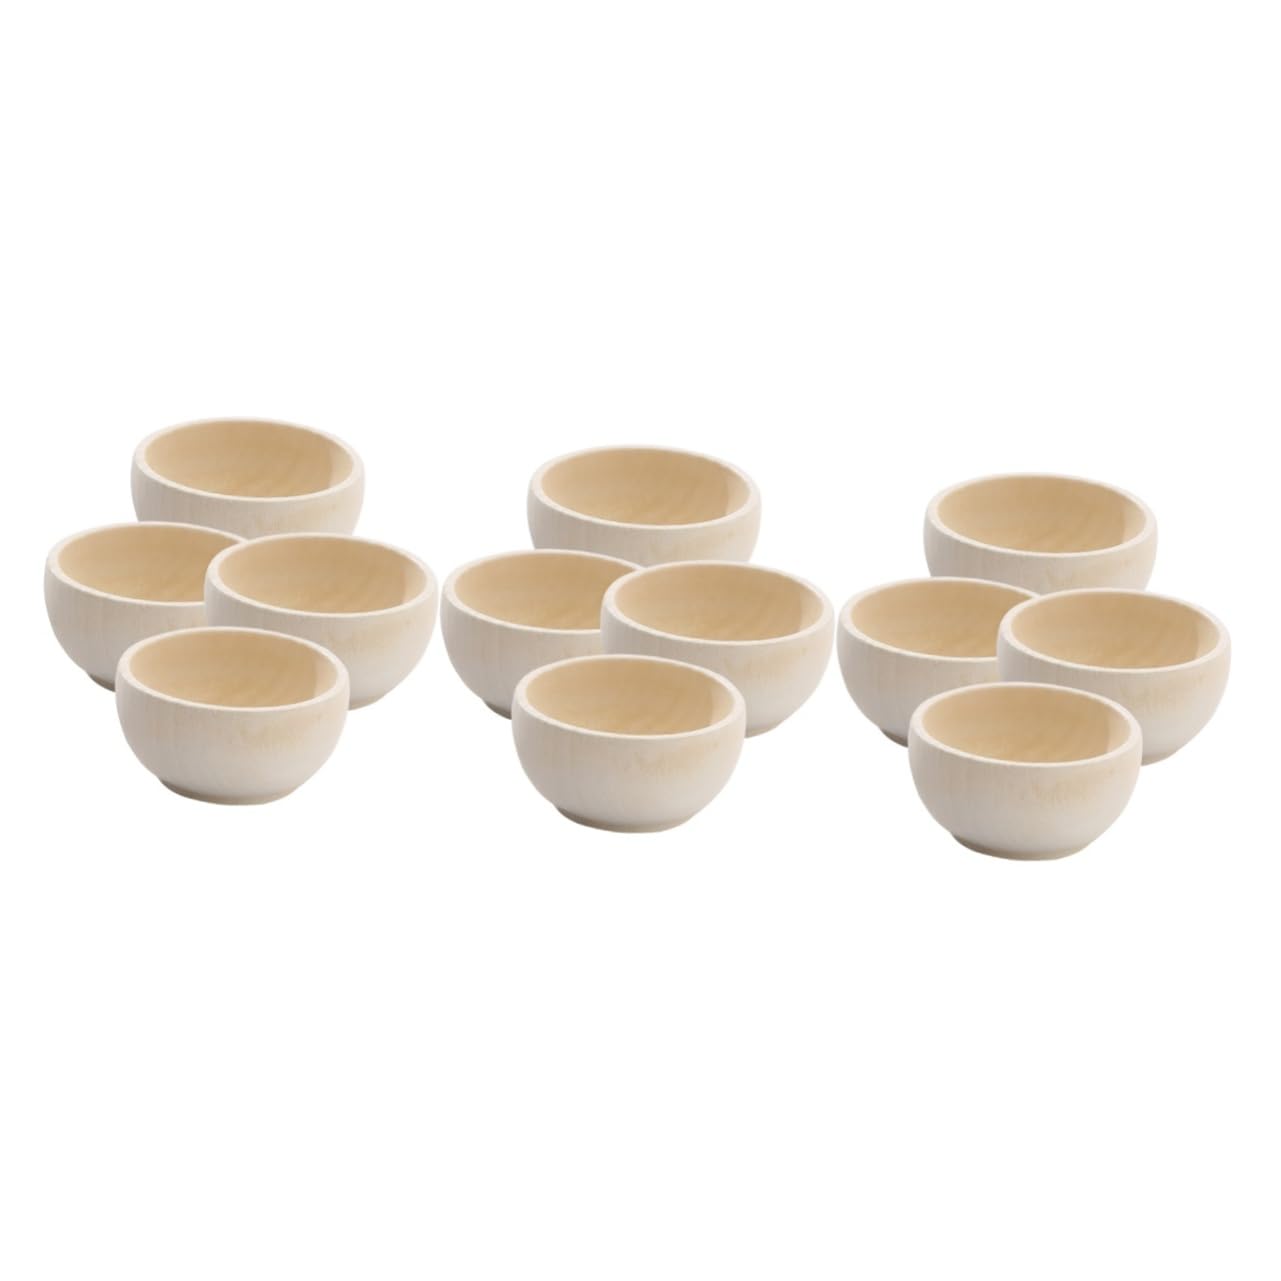 Abaodam 12 pcs small wooden bowl wooden crafts wooden cutlery dinnerware small wood bowls unfinished wood bowls wood bowl Delicate Wood Simulated